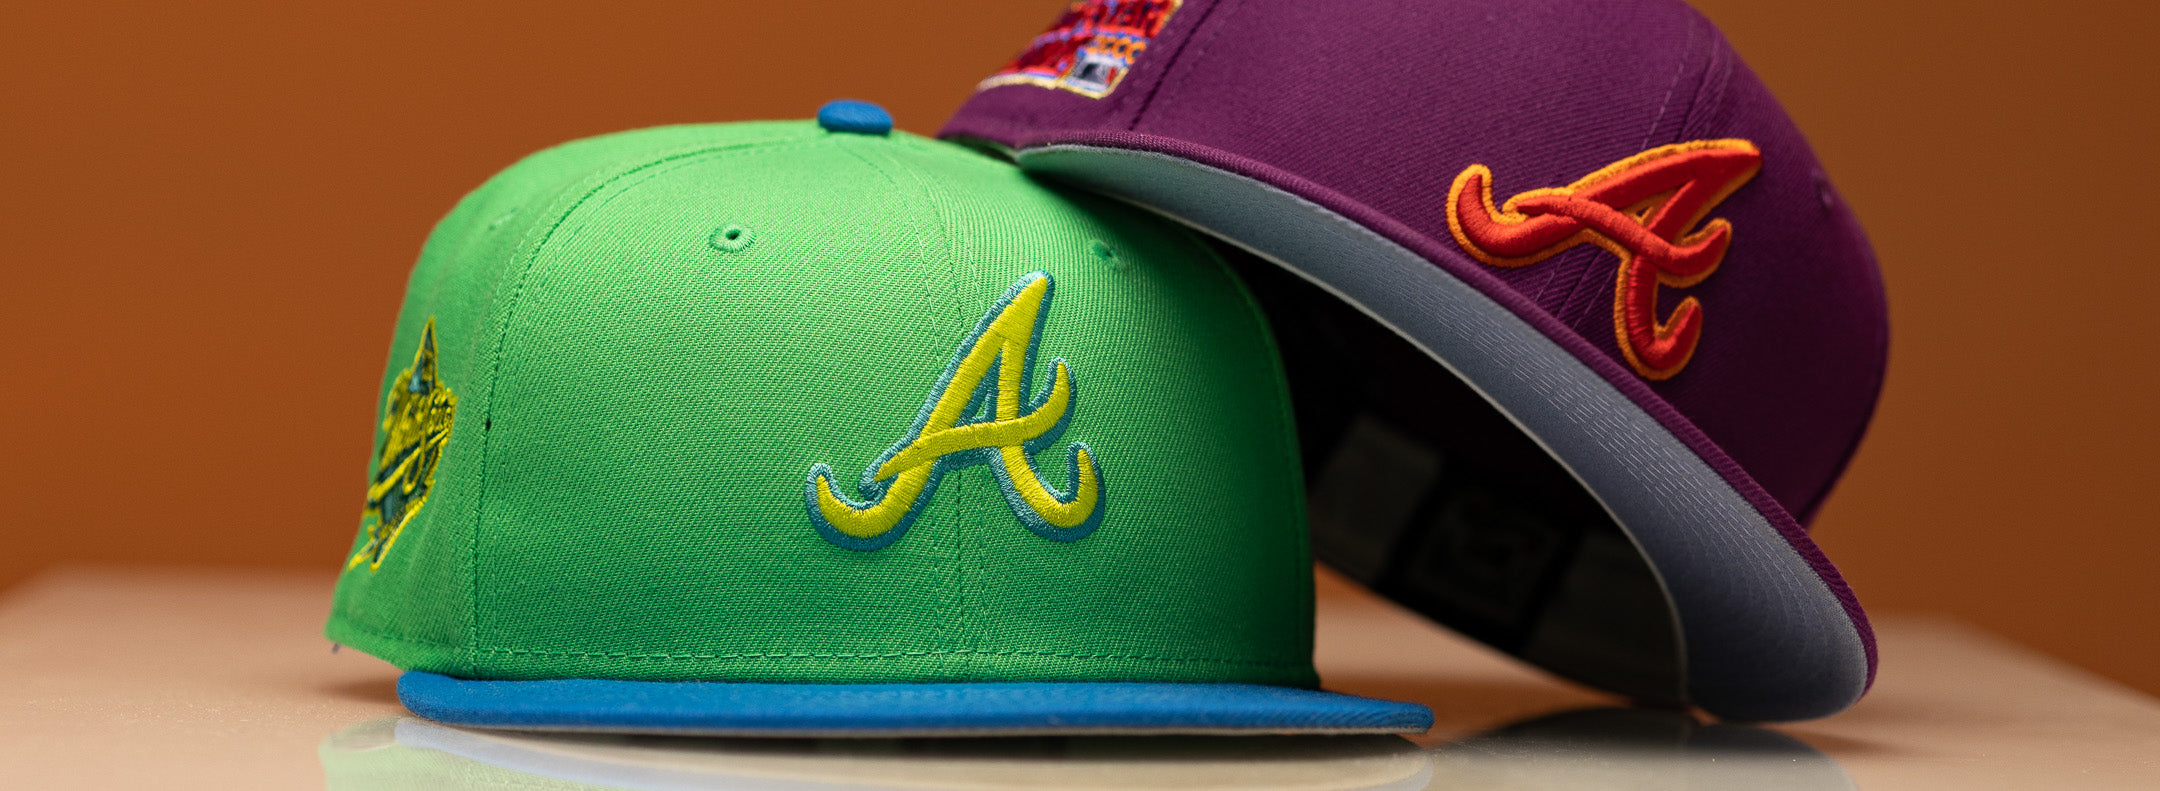 New Era x Politics Seattle Mariners 59FIFTY Fitted Hat - Atomic Yellow/Black, Size 7 3/4 by Sneaker Politics